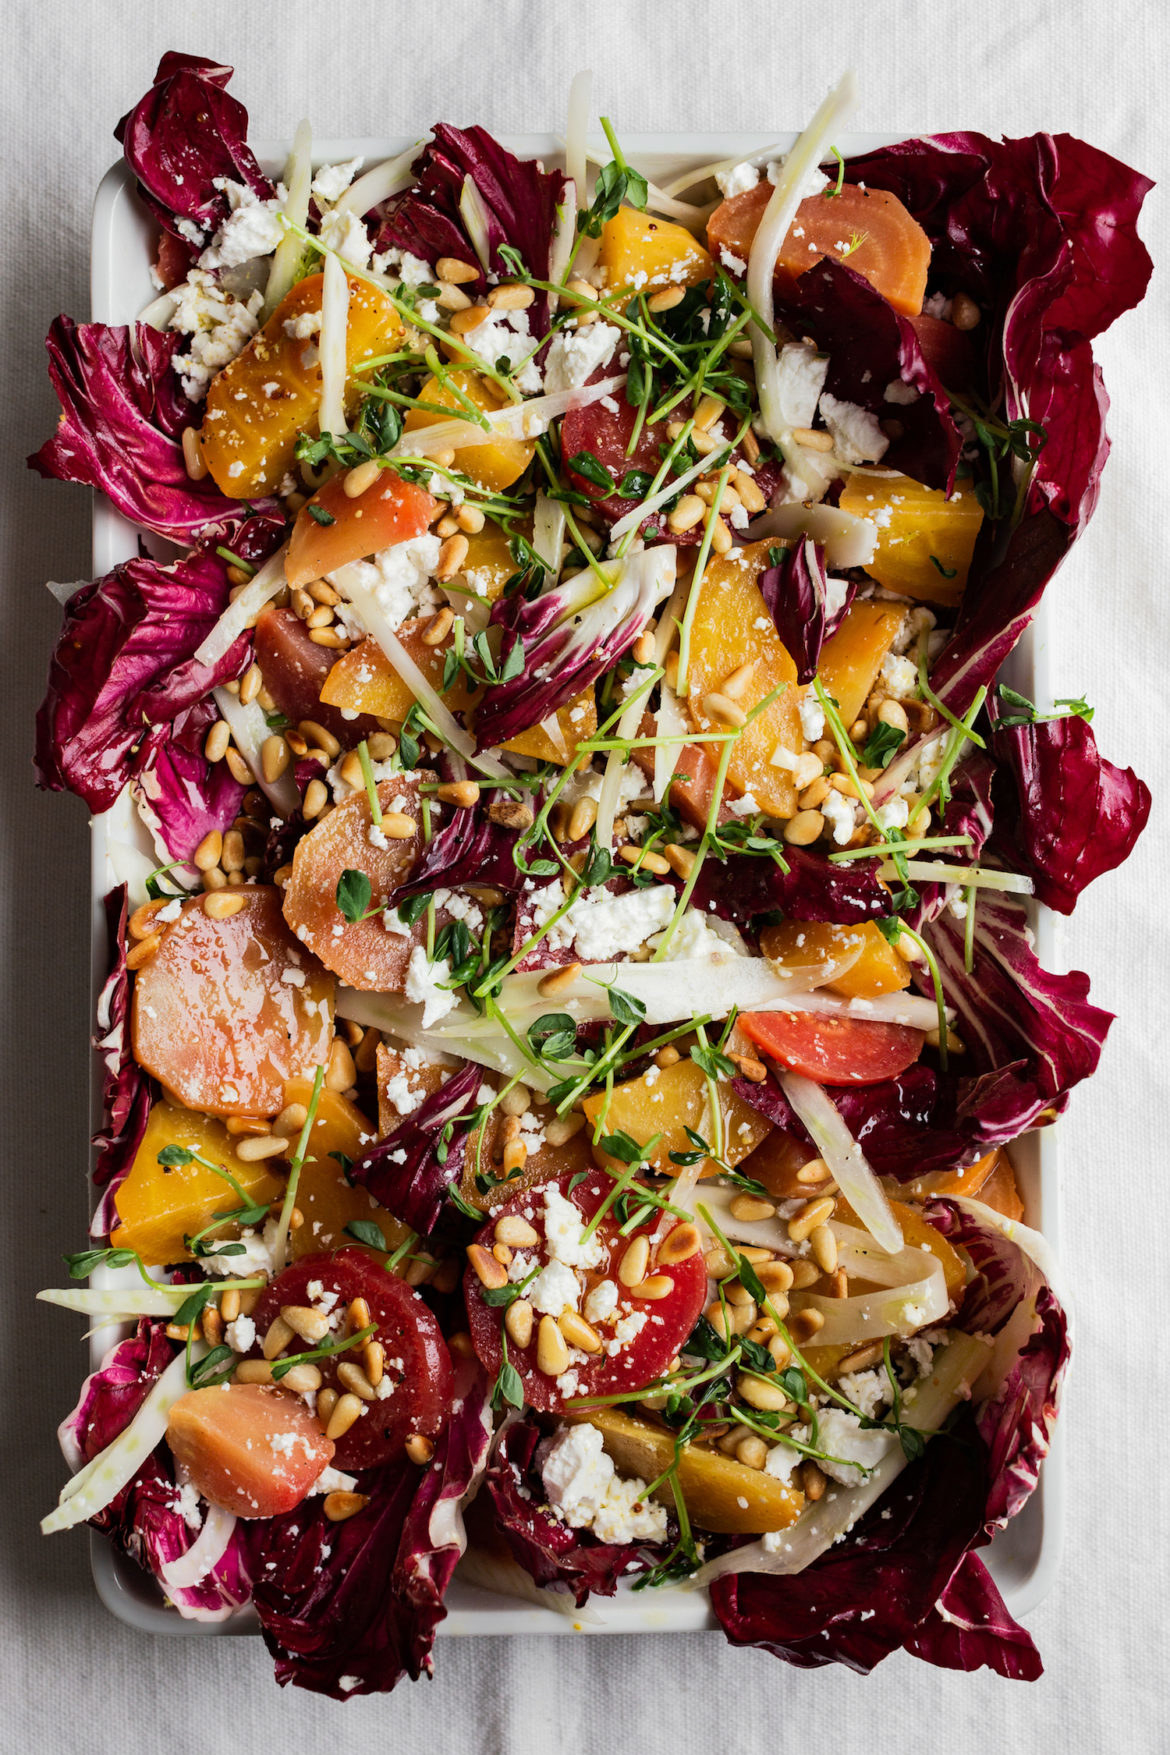 Beet and fennel salad with pine nuts.